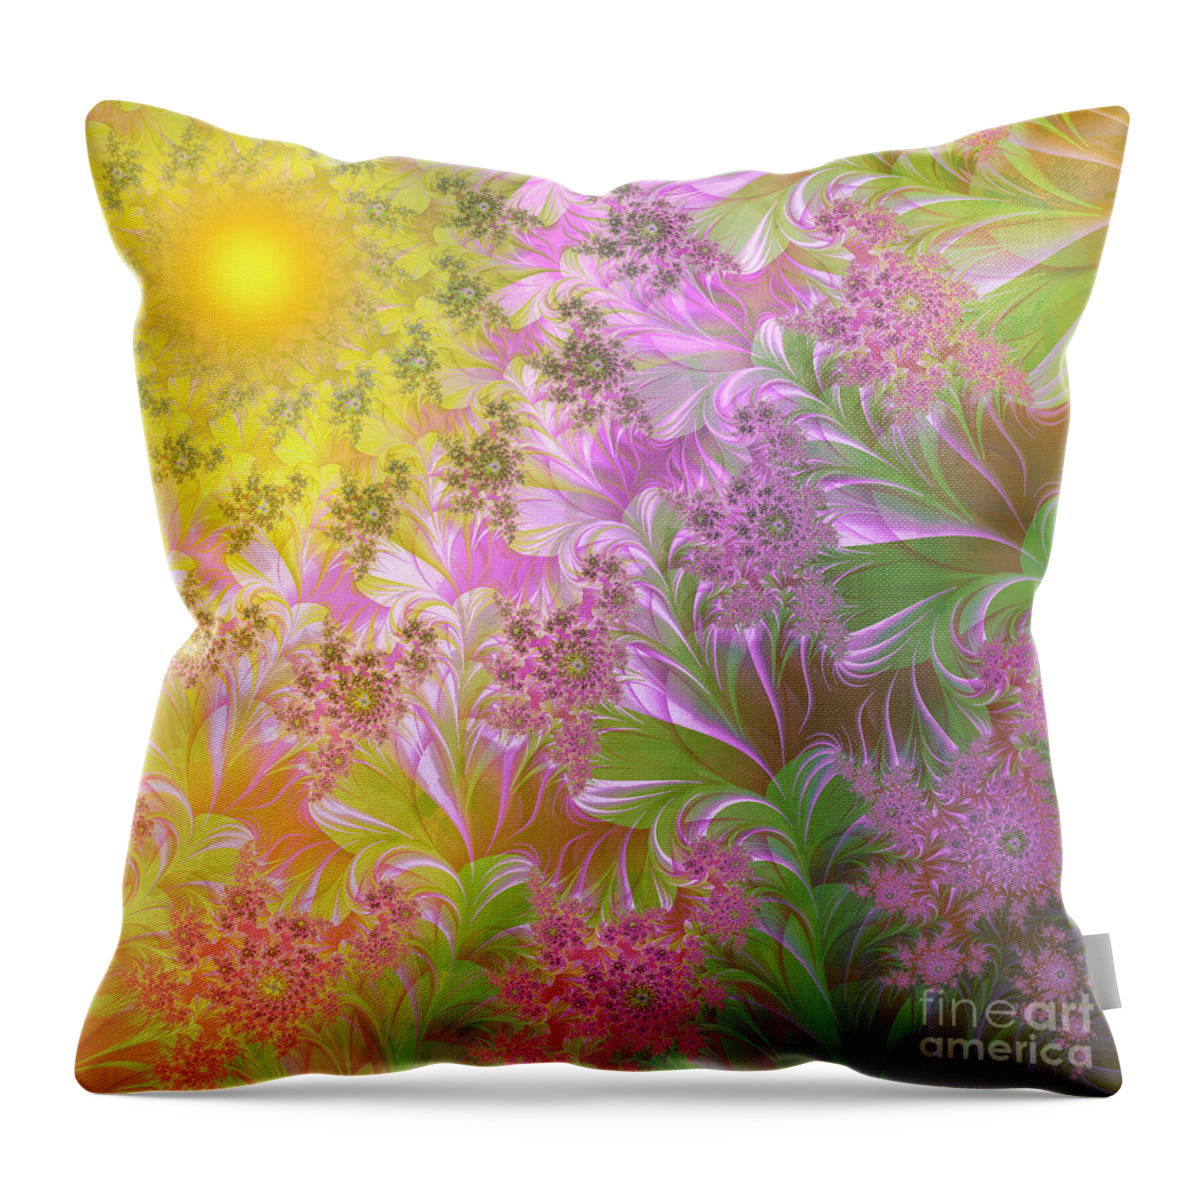 Sunrise Throw Pillow featuring the painting A Child's View by Mindy Sommers